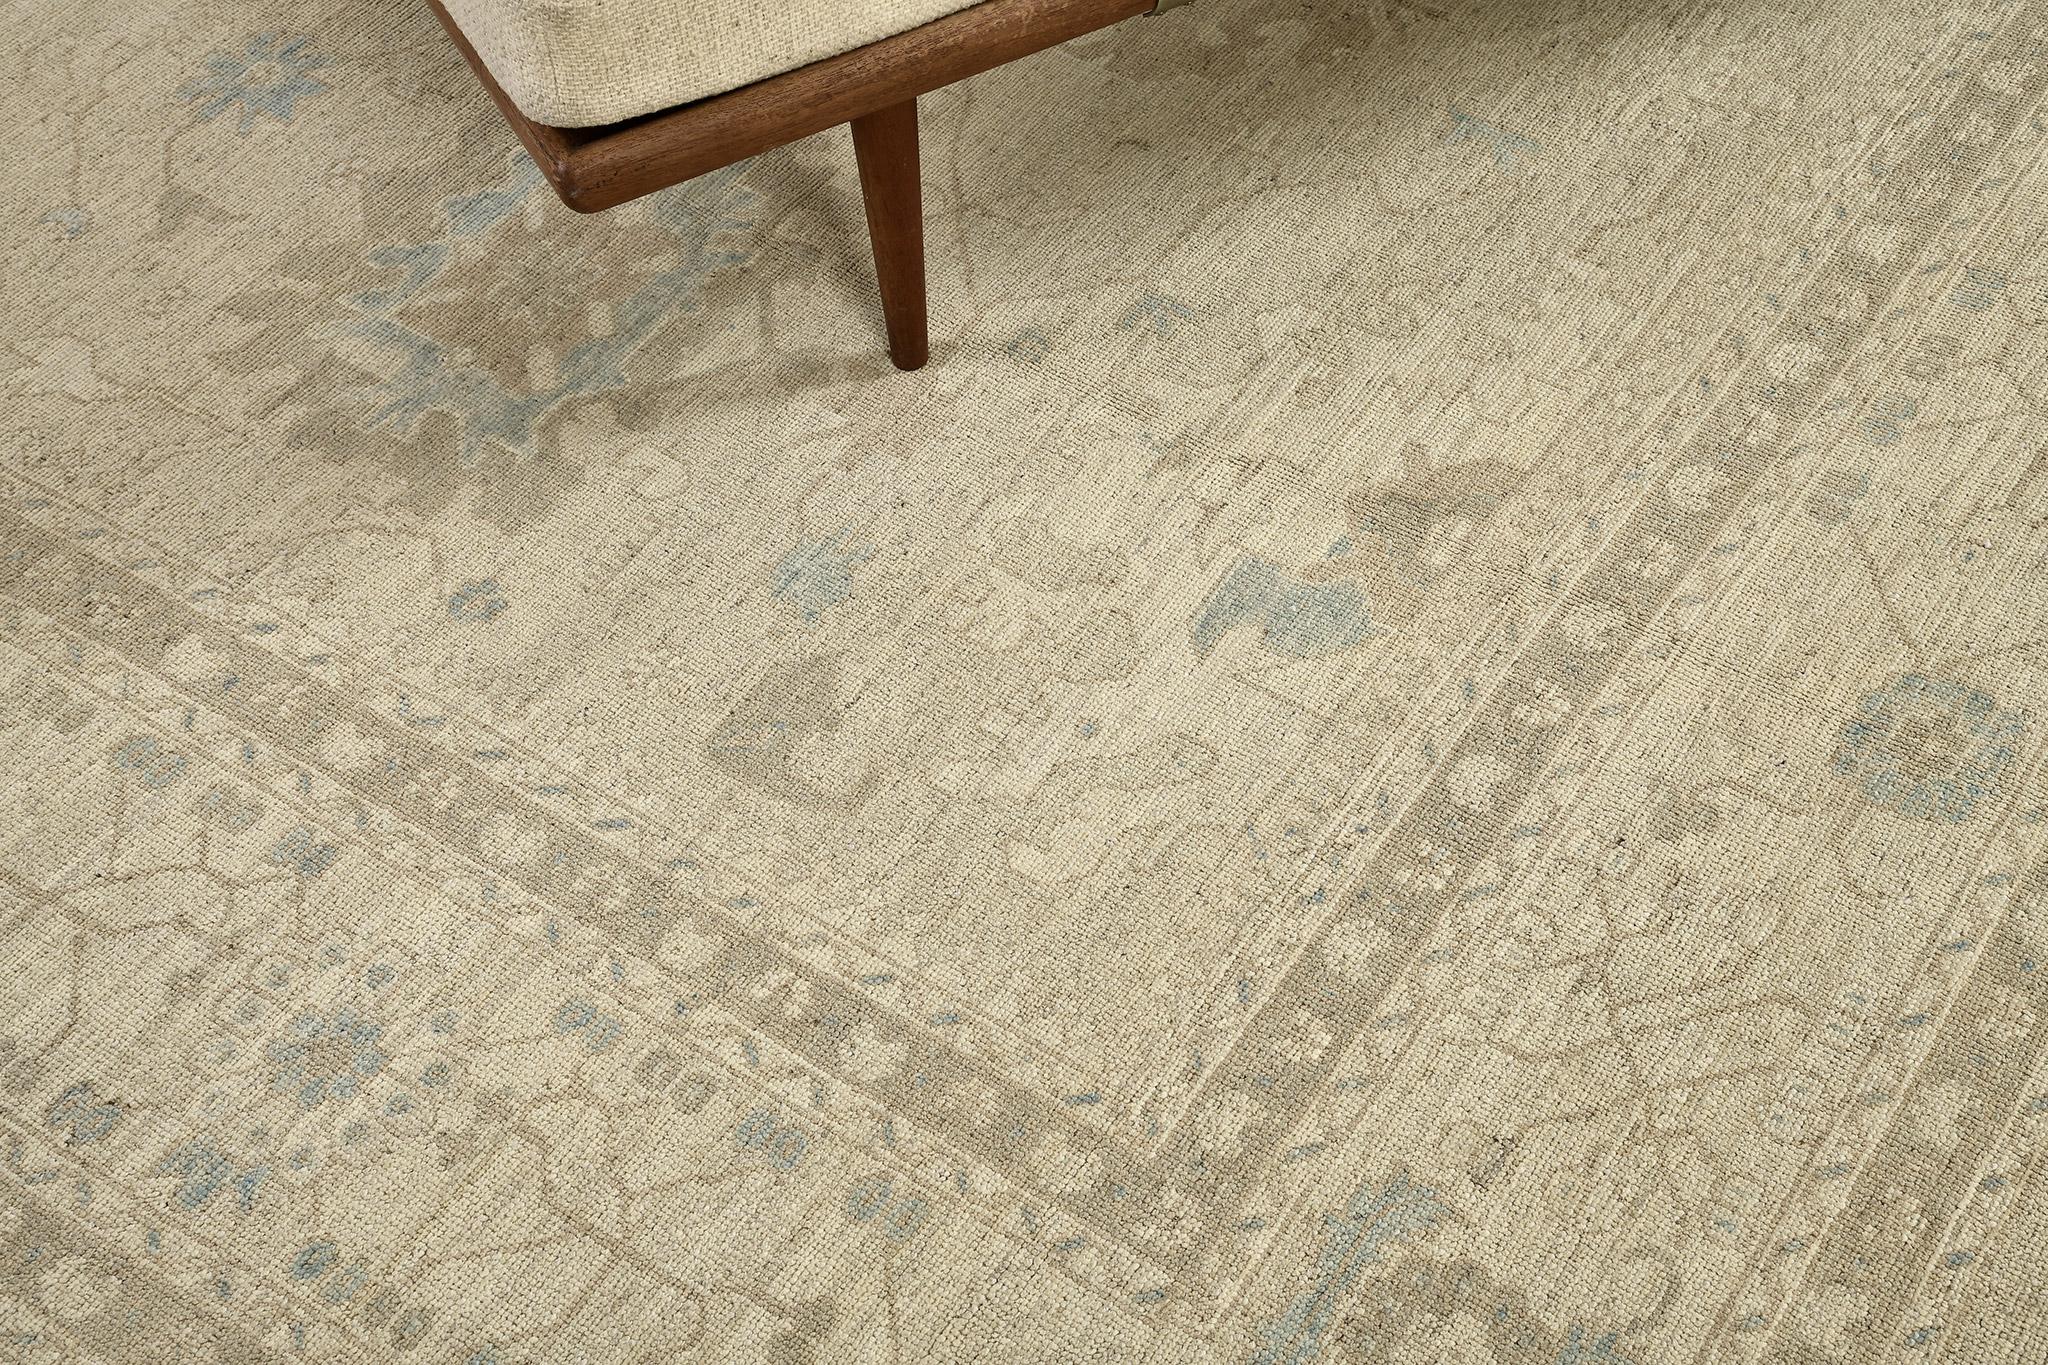 This incredibly woven Oushak Design rug showcases the botanical patterns that are simultaneously displayed all over the magnificent sandy field resulting in a captivating impression of creativity in the traditionally represented motifs. Dreamy and